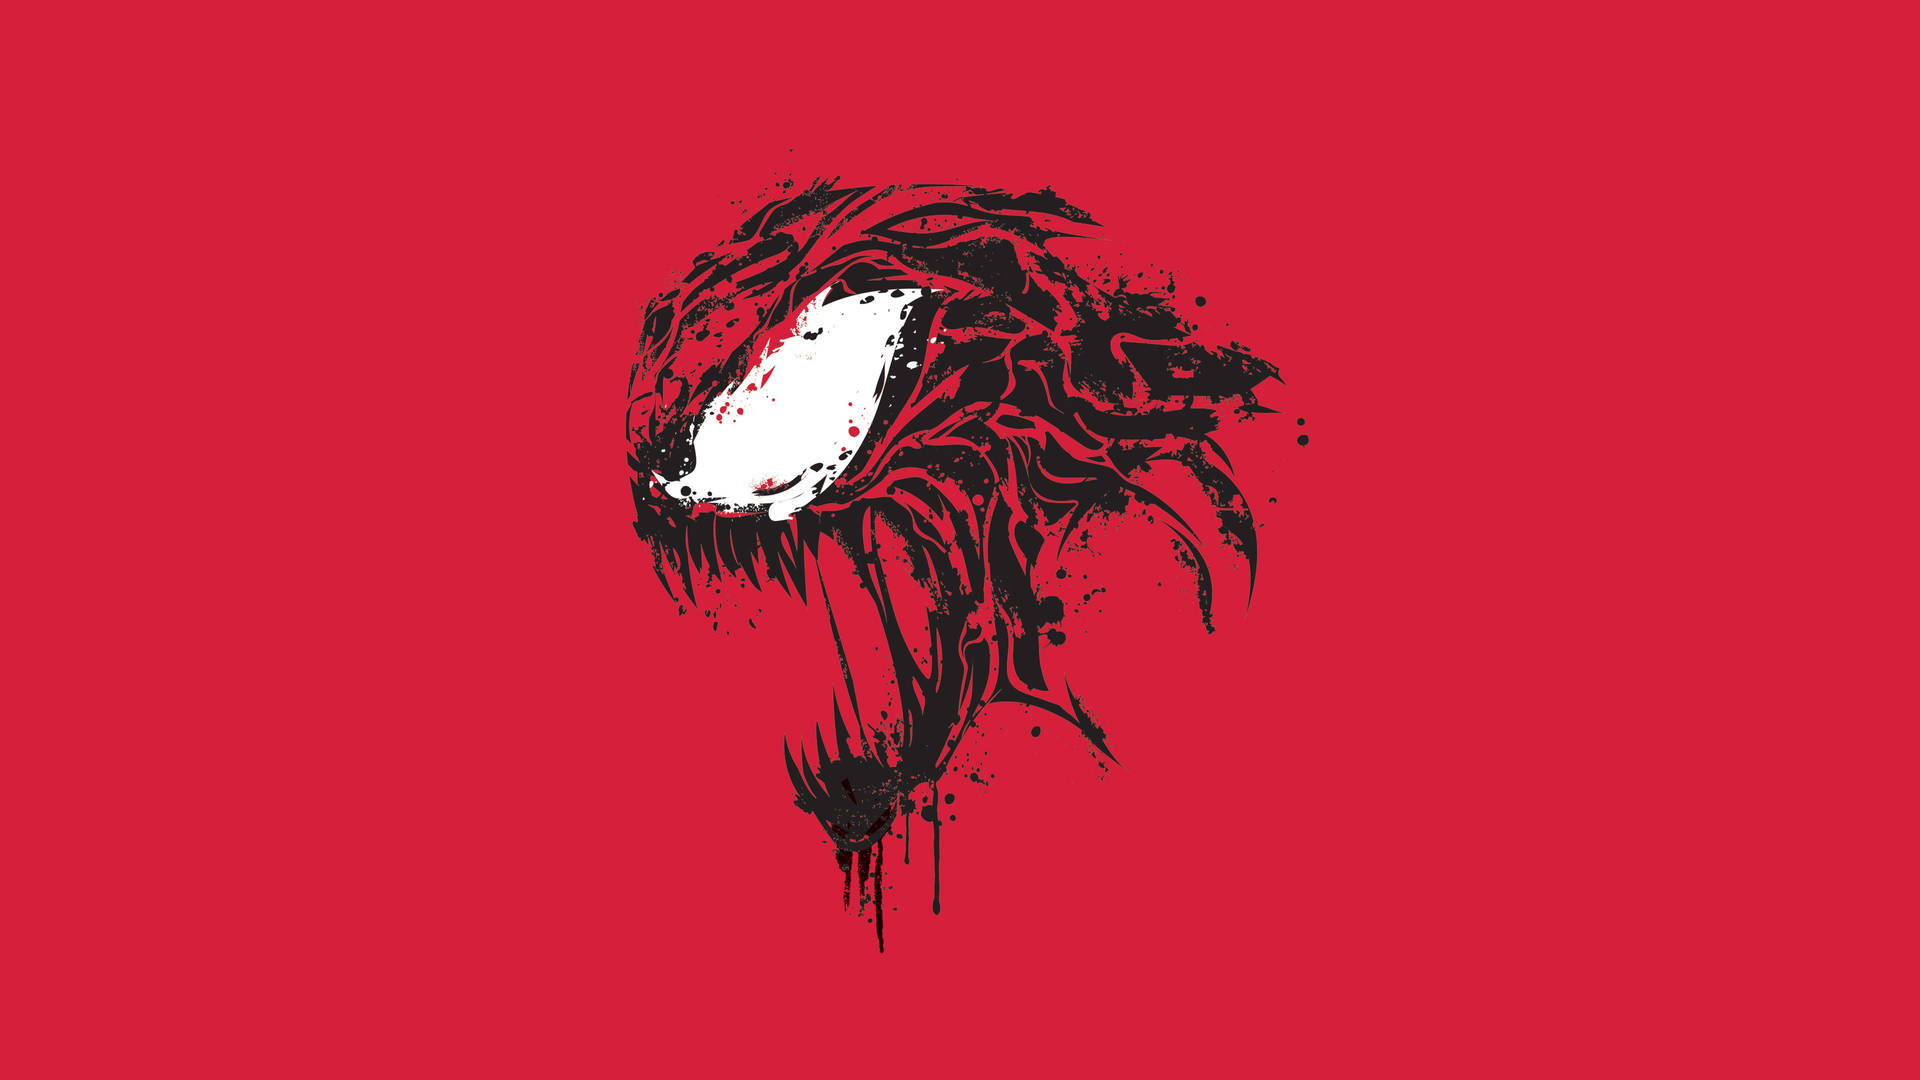 Venom Let There Be Carnage HD Wallpapers  4K Backgrounds  Wallpapers Den